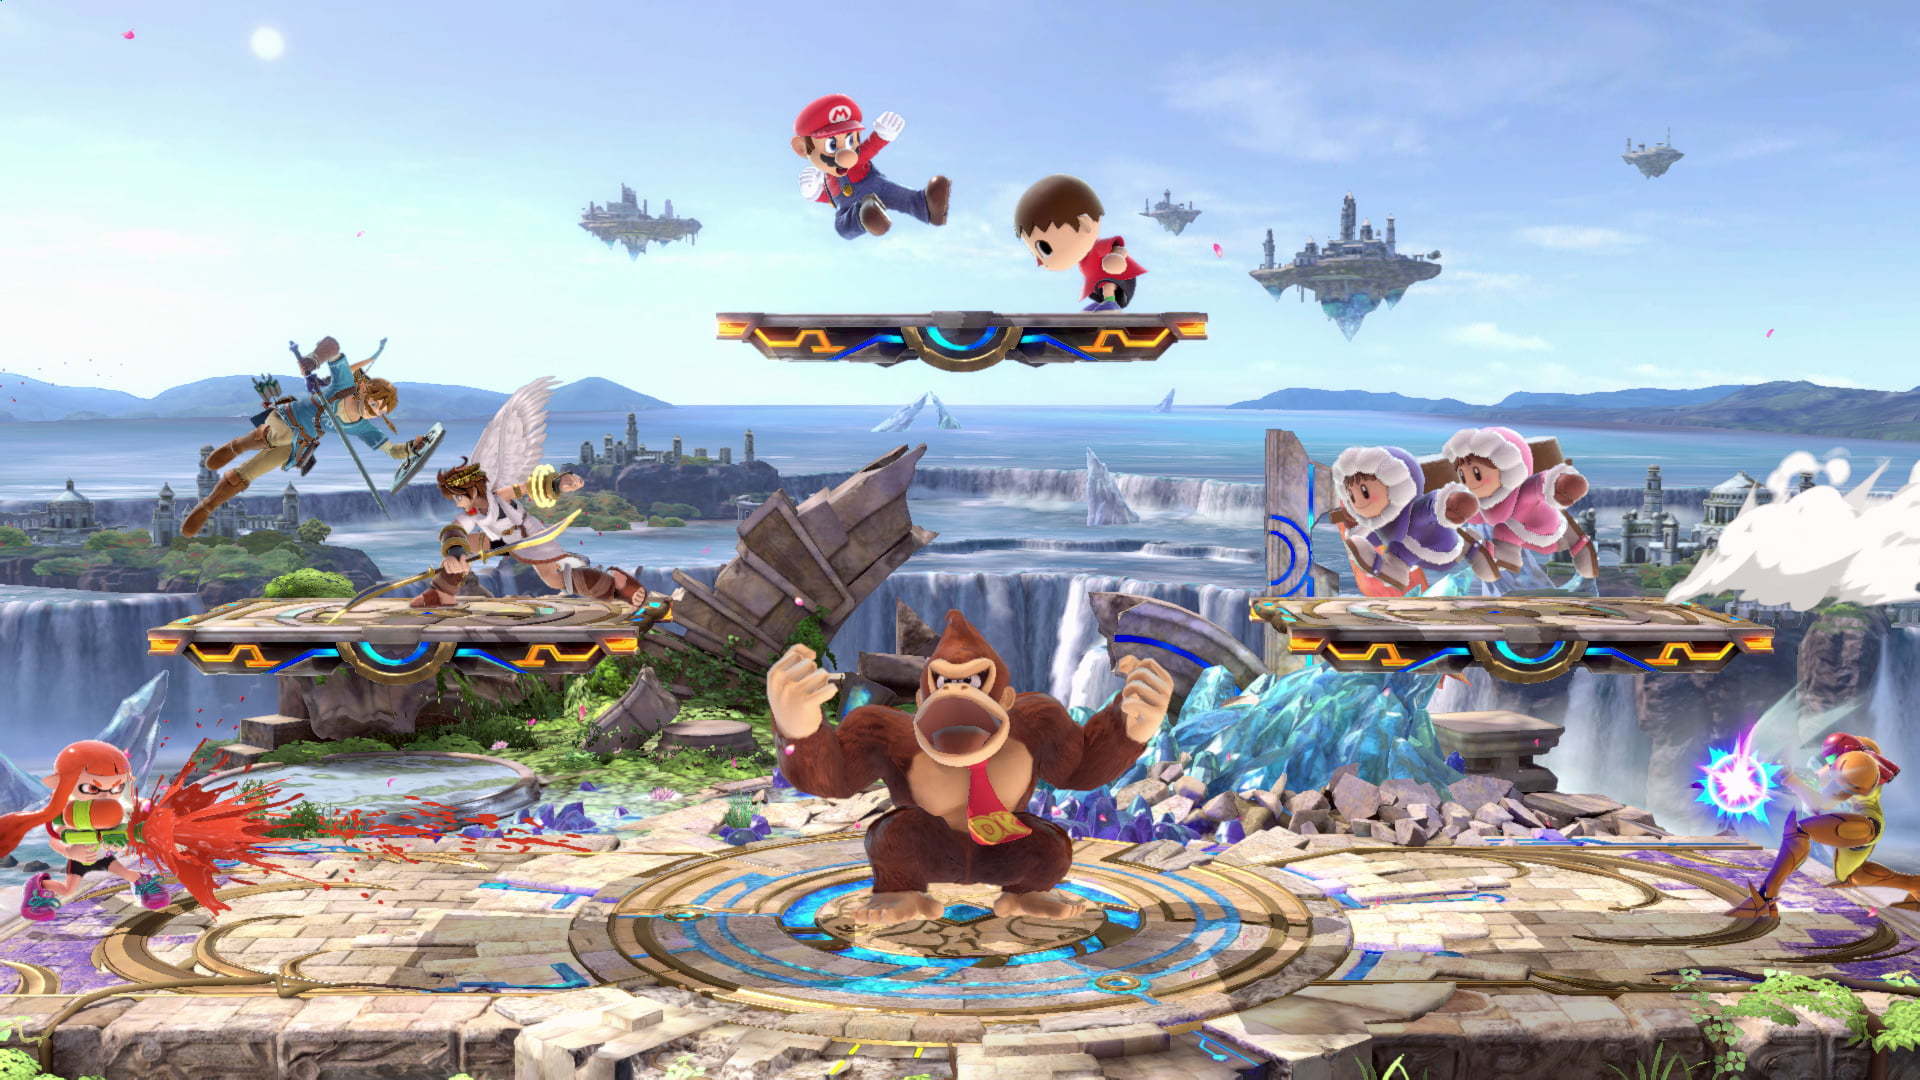 Here's All The News From Today's 'Super Smash Bros. Ultimate' Direct